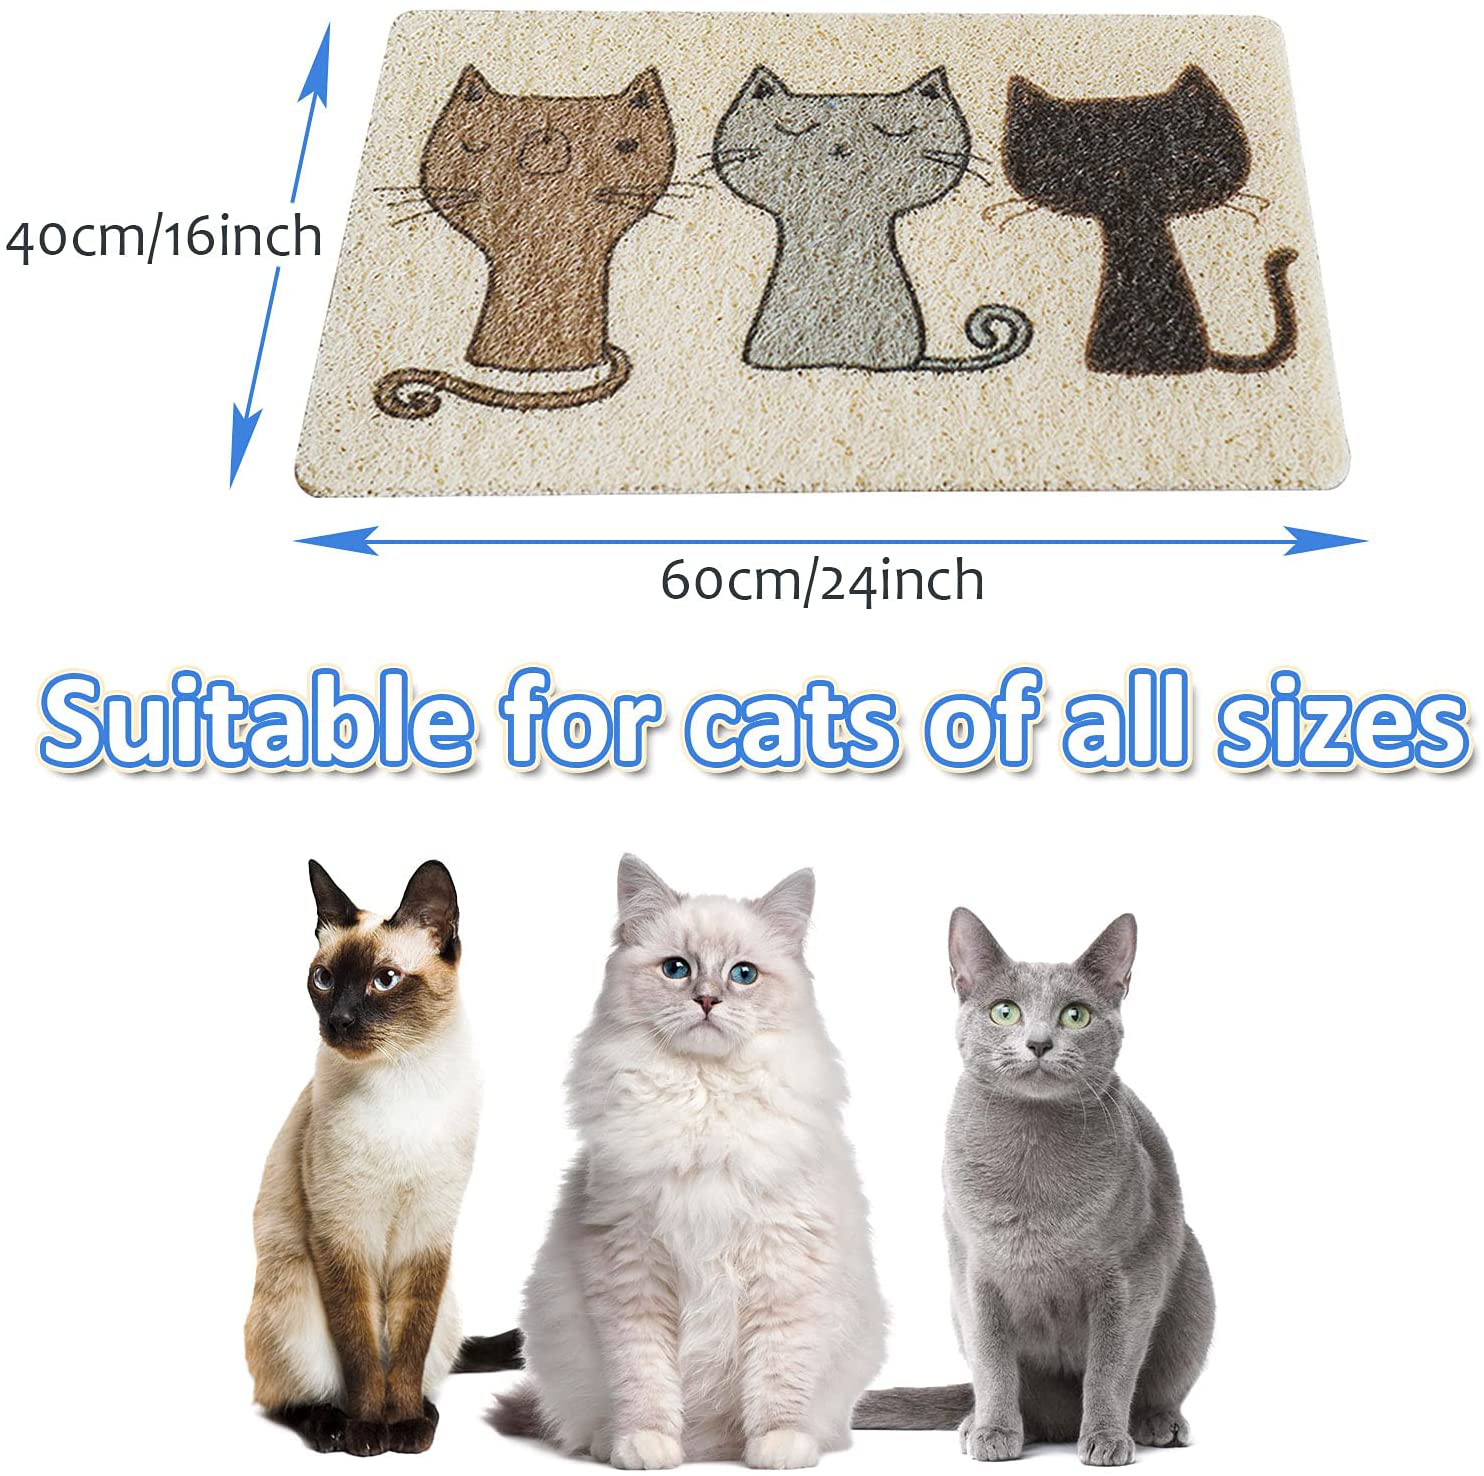 Cat Litter Mat, Cute Kitty Food Feeding Catching Placemat, Durable Pet Litter Rug for Cats, Dogs, Comfortable Kitten Litter Trapping Pad, under Litter Box Mat Soft on Paws, Easy Clean Scatter Control